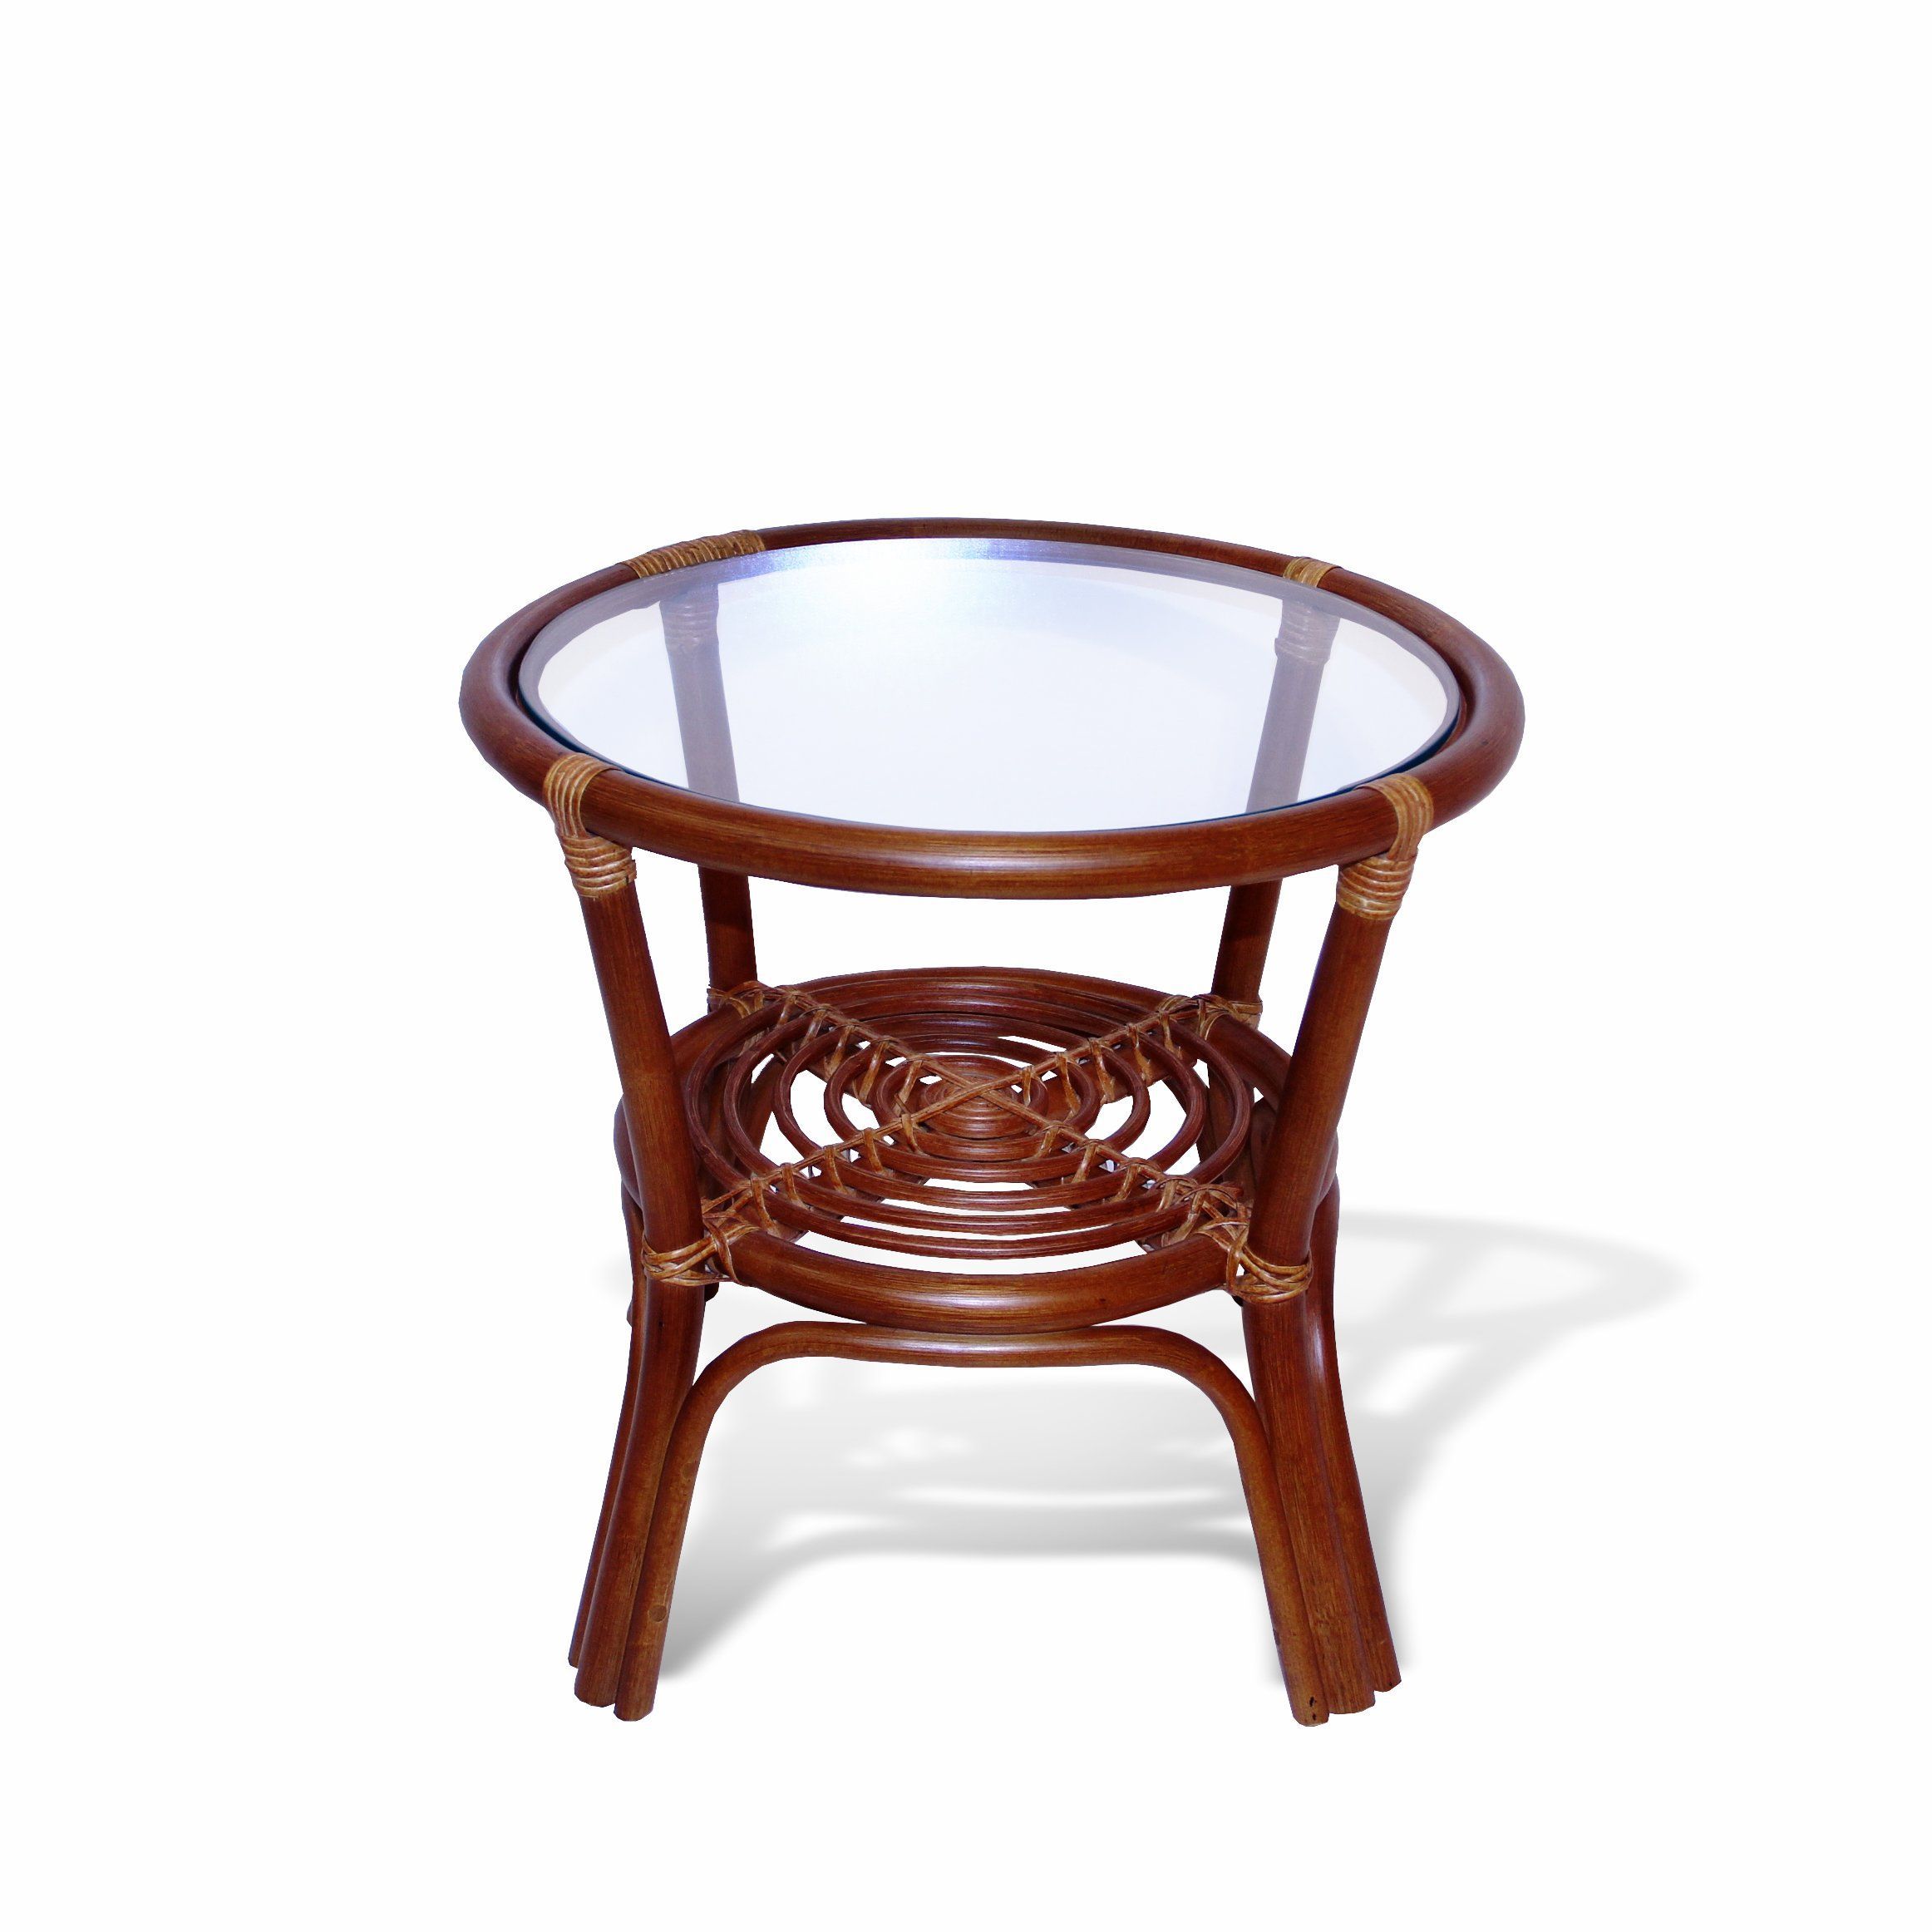 Round Coffee Table W/ Glass Top Natural Rattan Wicker Eco Regarding Natural Woven Banana Coffee Tables (View 14 of 15)